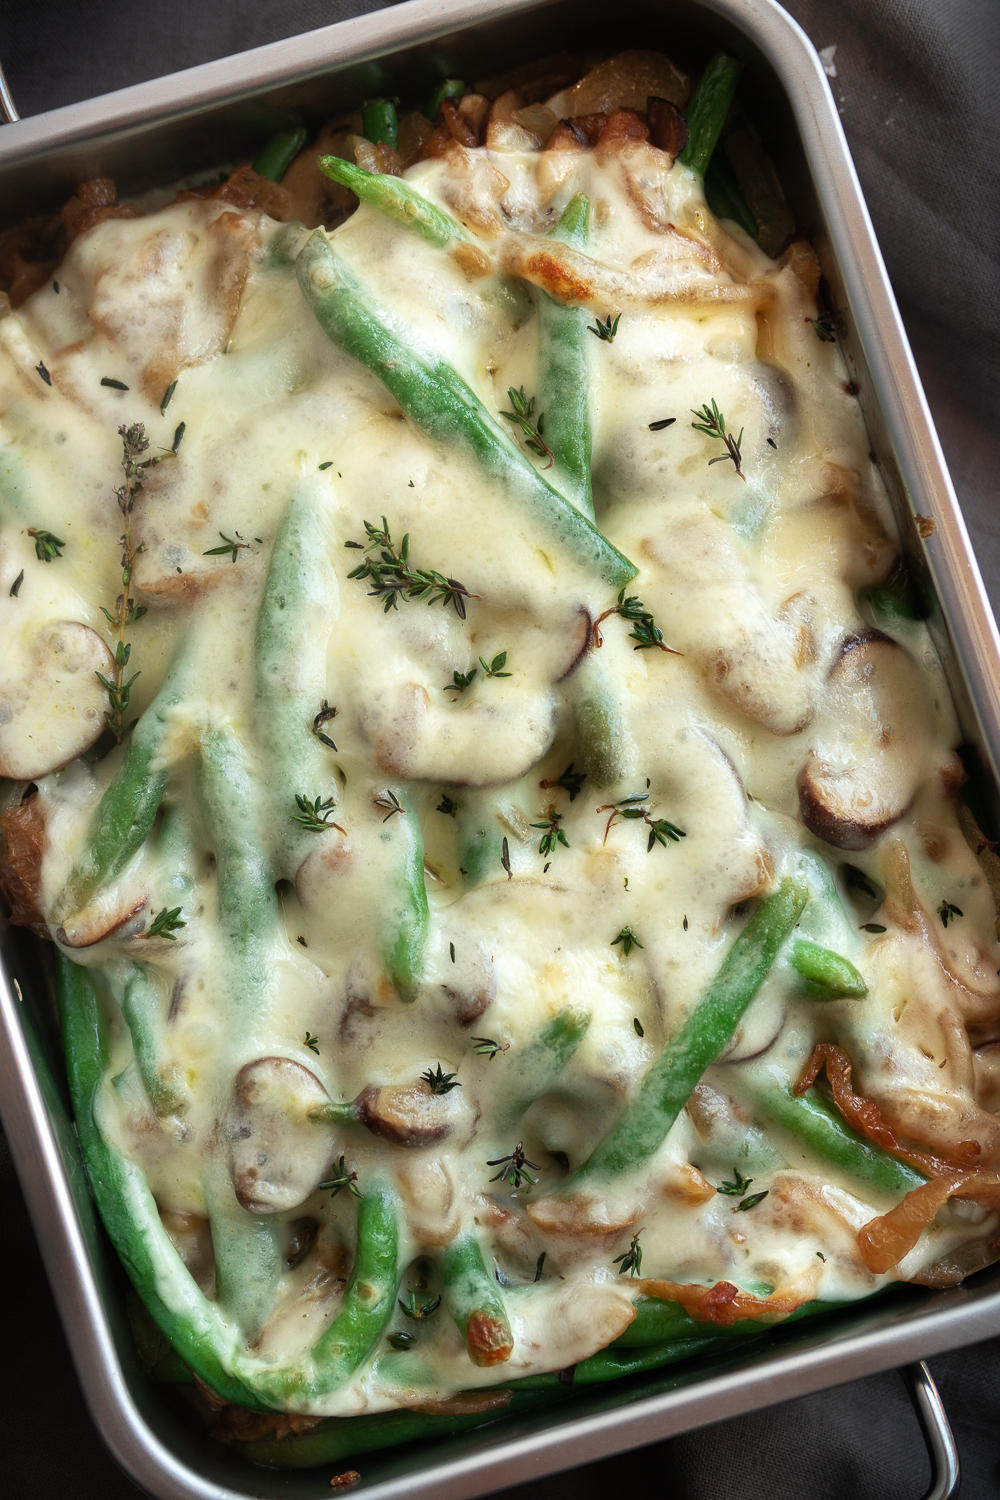 These Cheesy French Onion Green Beans are a flavorful twist on the classic green bean casserole. Whether you're entertaining for Friendsgiving, attending a family gathering, or bringing something to your office potluck, this is the portable side dish you need to bring!